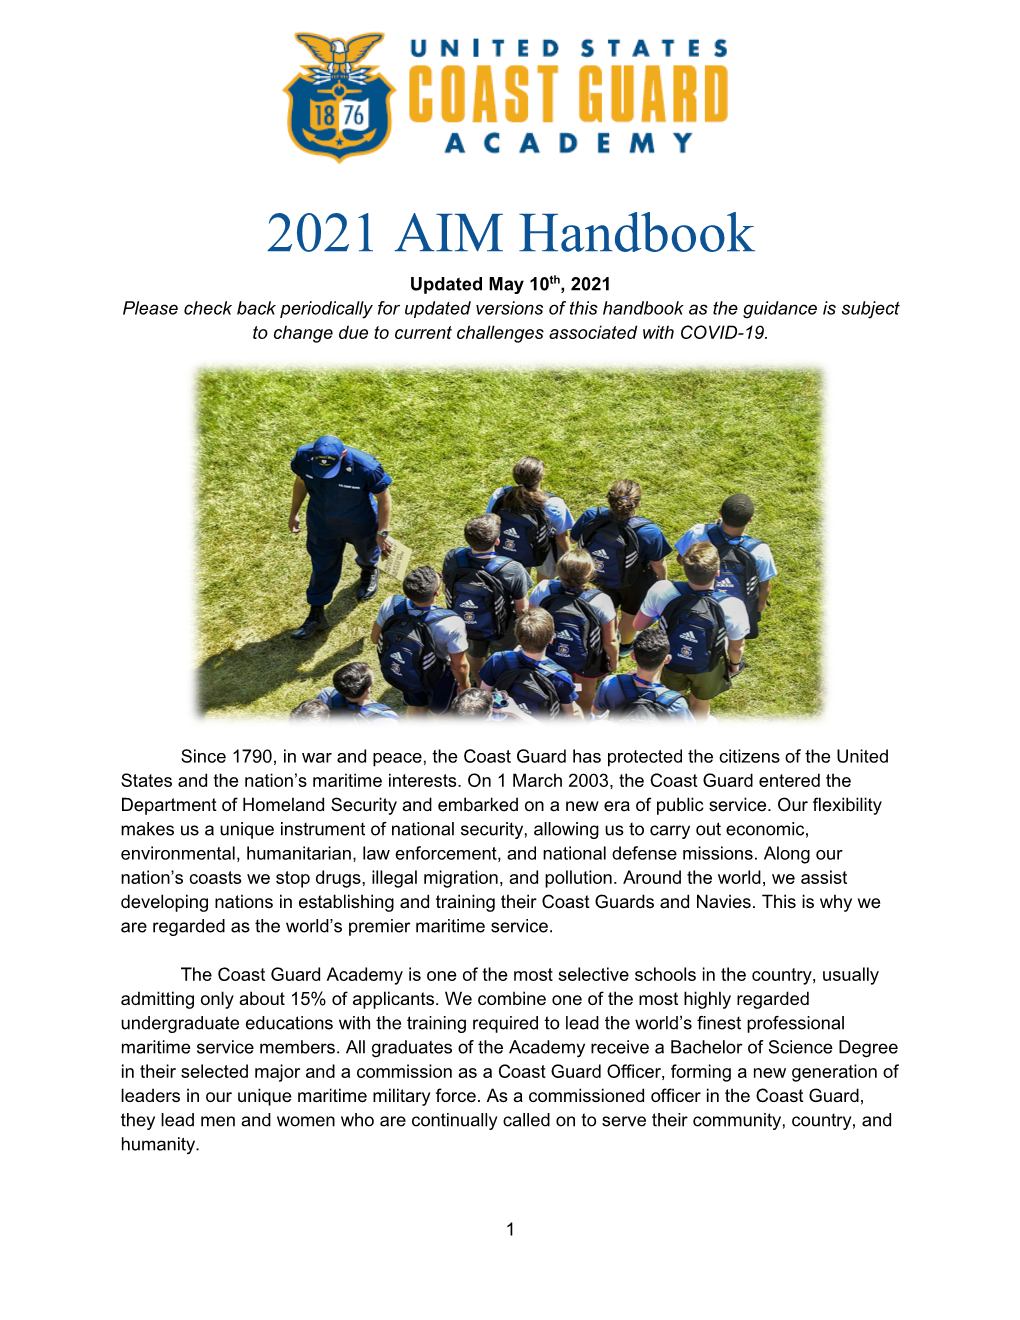 AIM Handbook 2021 ● Copies of All Forms and Required Submission Items in This Packet ● Two Pairs of Glasses, Or Contact Lenses, If You Wear Them